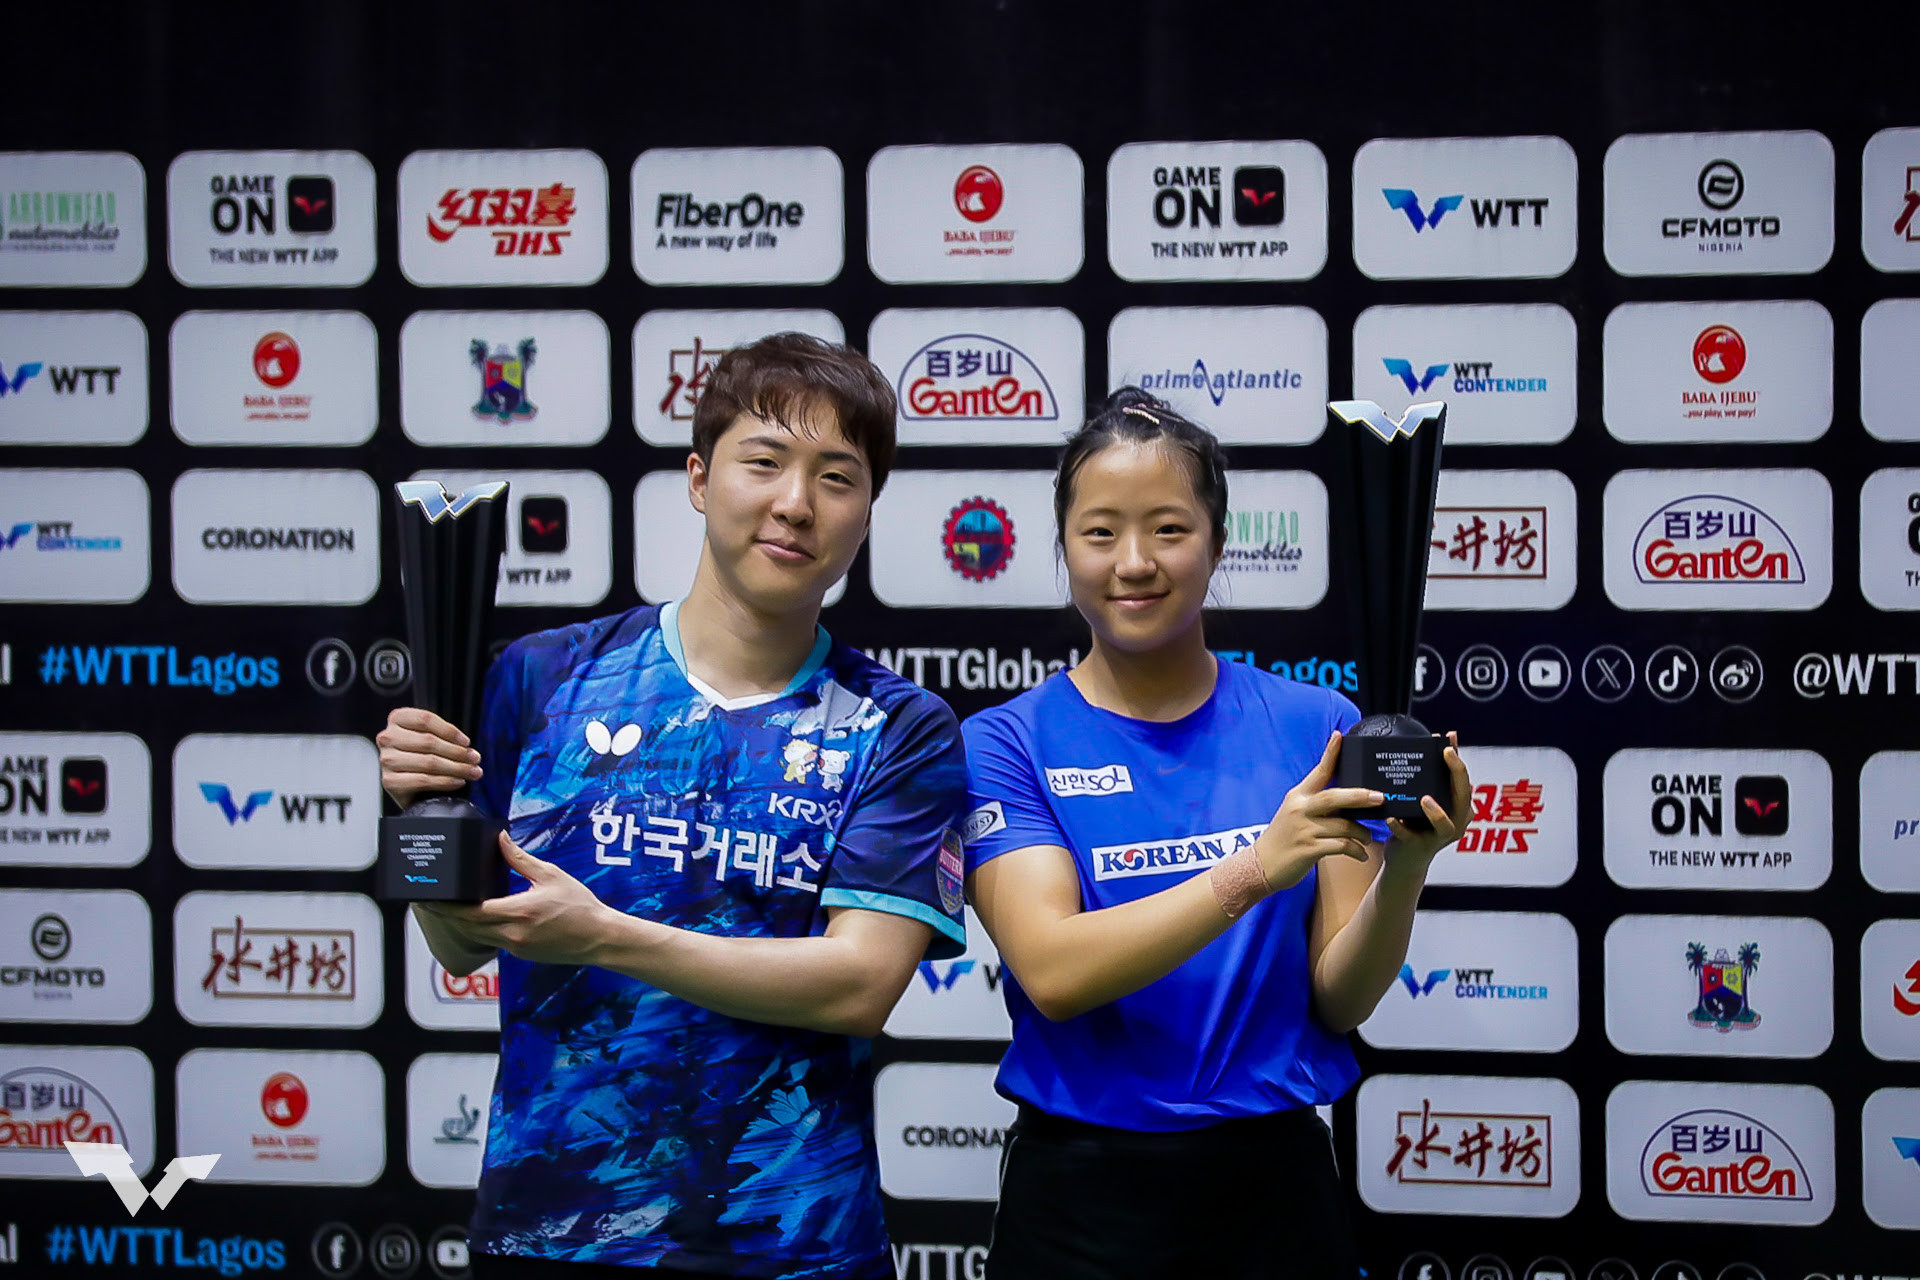 Another win for the Korean pair Shin Yubin and Lim Jonghoon who will be heading to the Paris Olympics together. WTT CONTENDER LAGOS